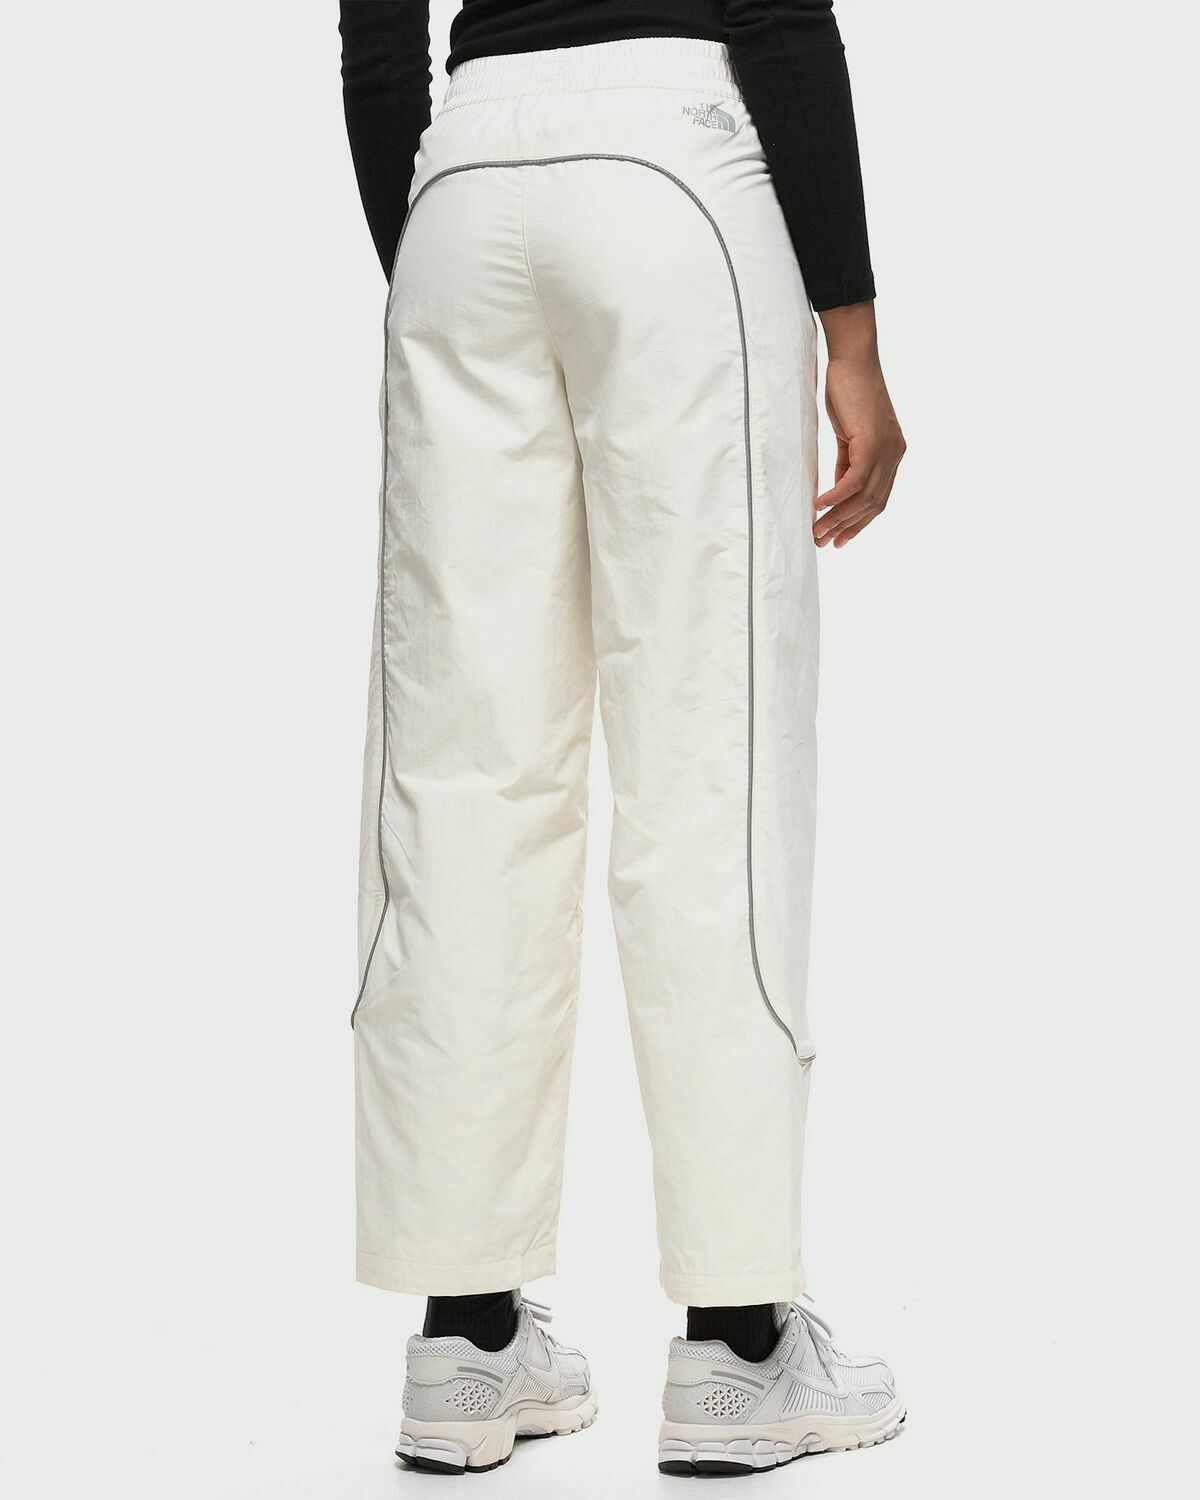 The North Face Women's Tek Piping Wind Pant White - Womens